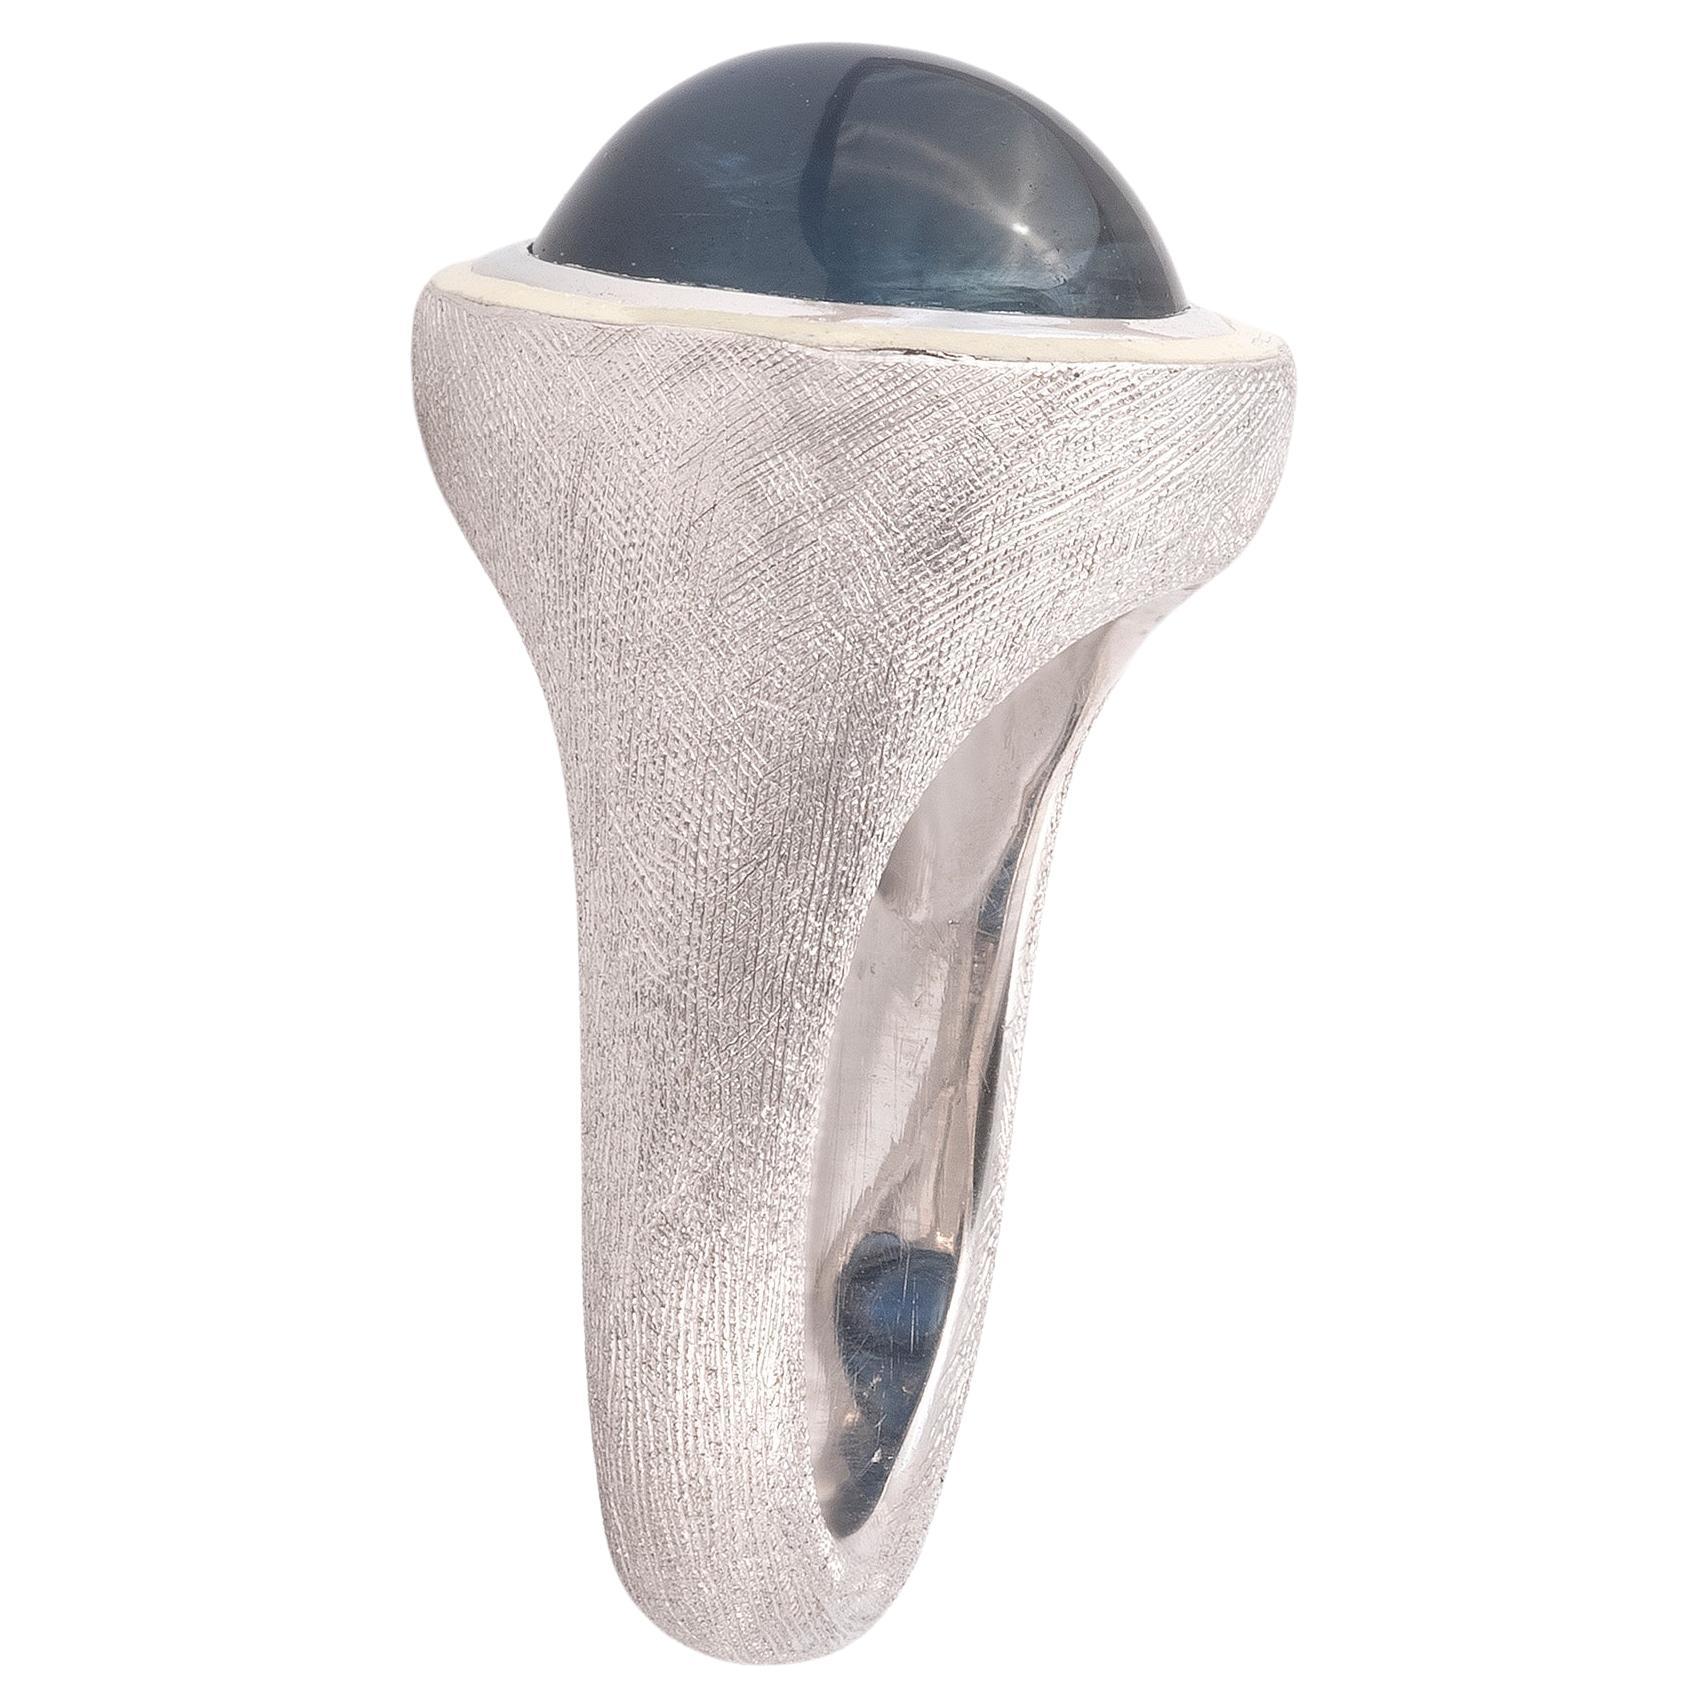 In brushed white gold with central cabochon sapphire weighing approx. 9ct framed by cream enamel
Circa 1970
Size 7 1/4
Weight: 15,44gr.